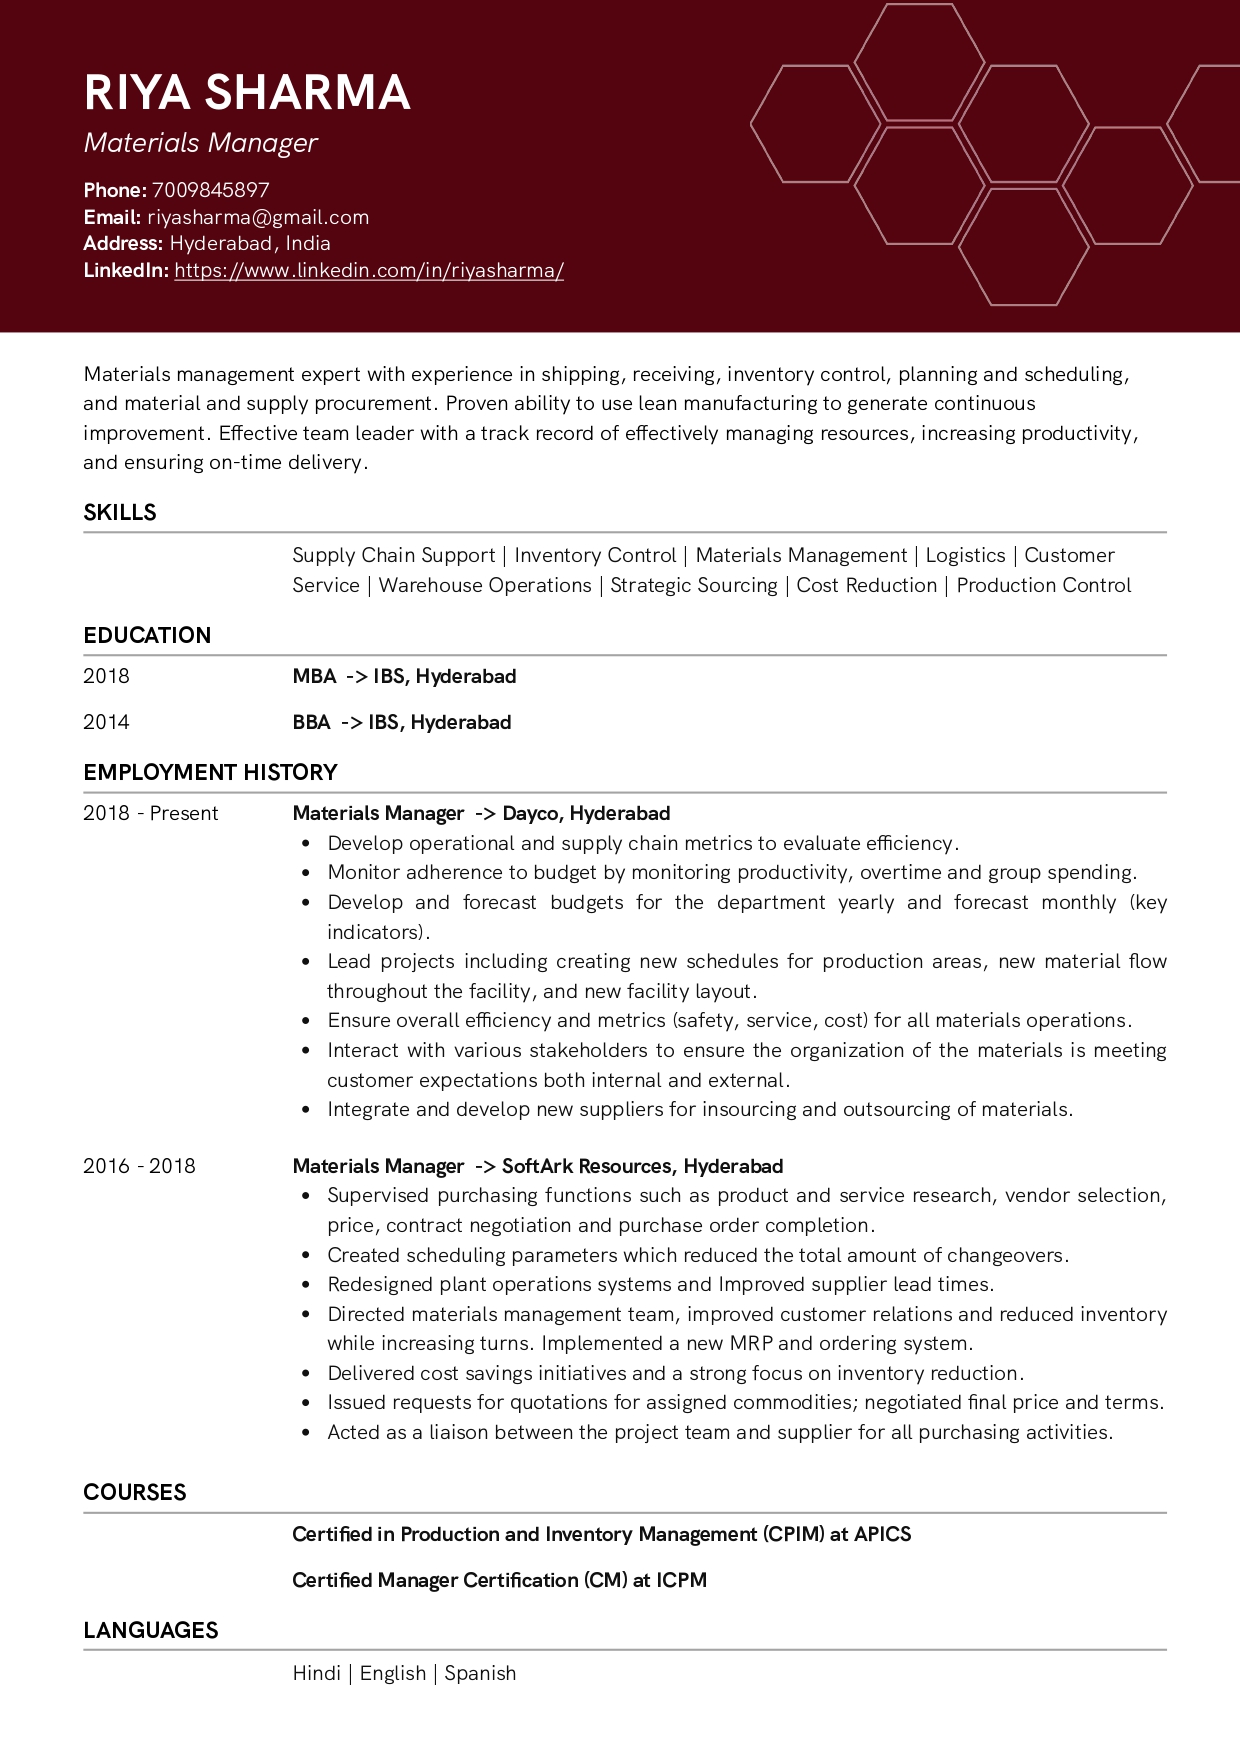 Sample Resume of Materials Manager | Free Resume Templates & Samples on Resumod.co